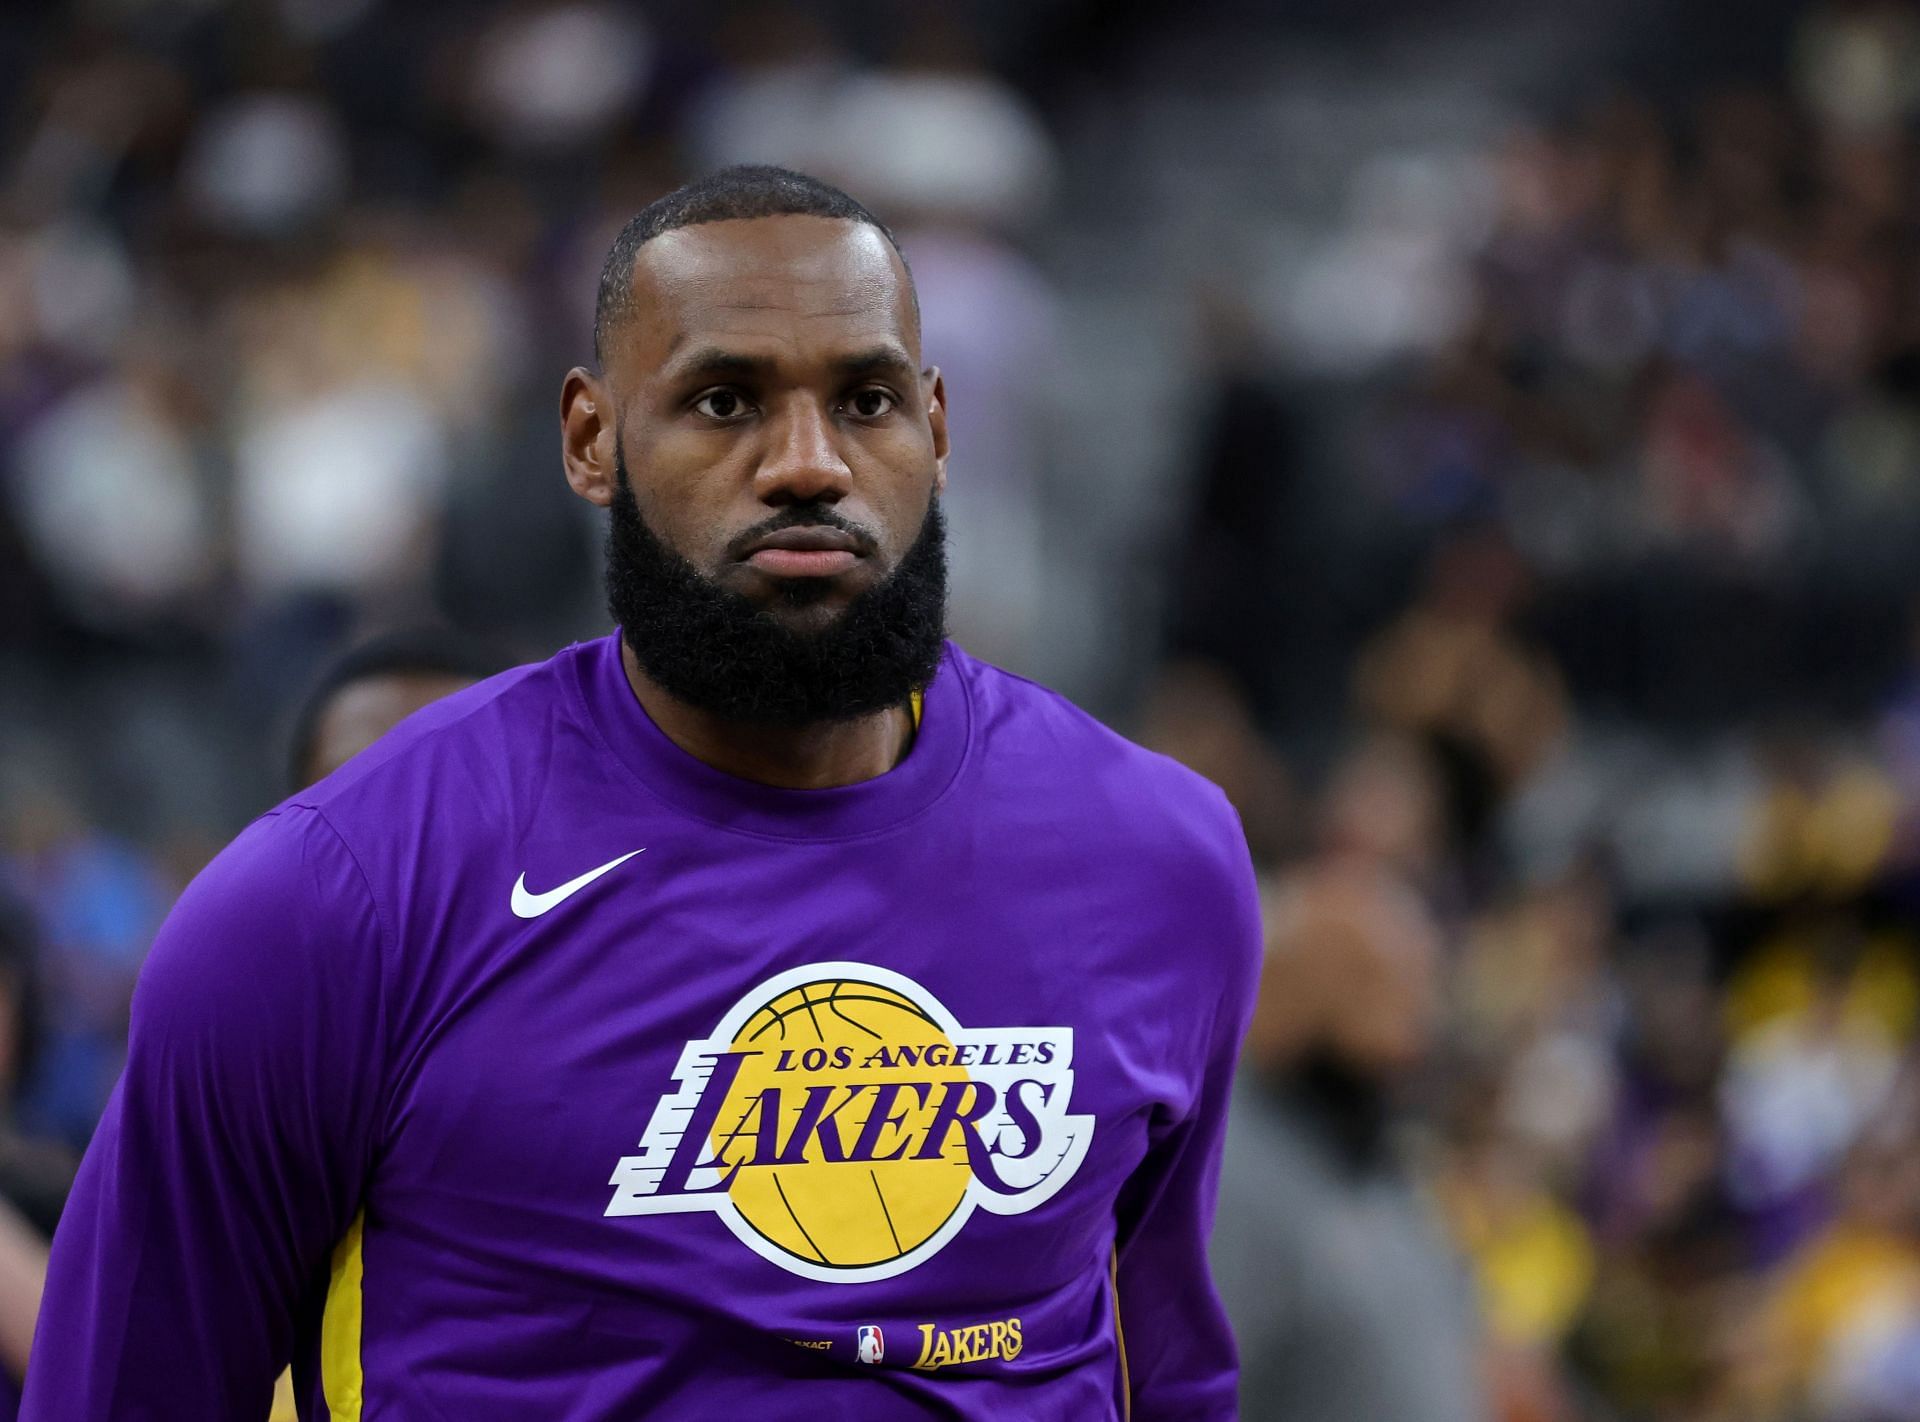 The LA Lakers may open their season without LeBron James (Image via Getty Images)